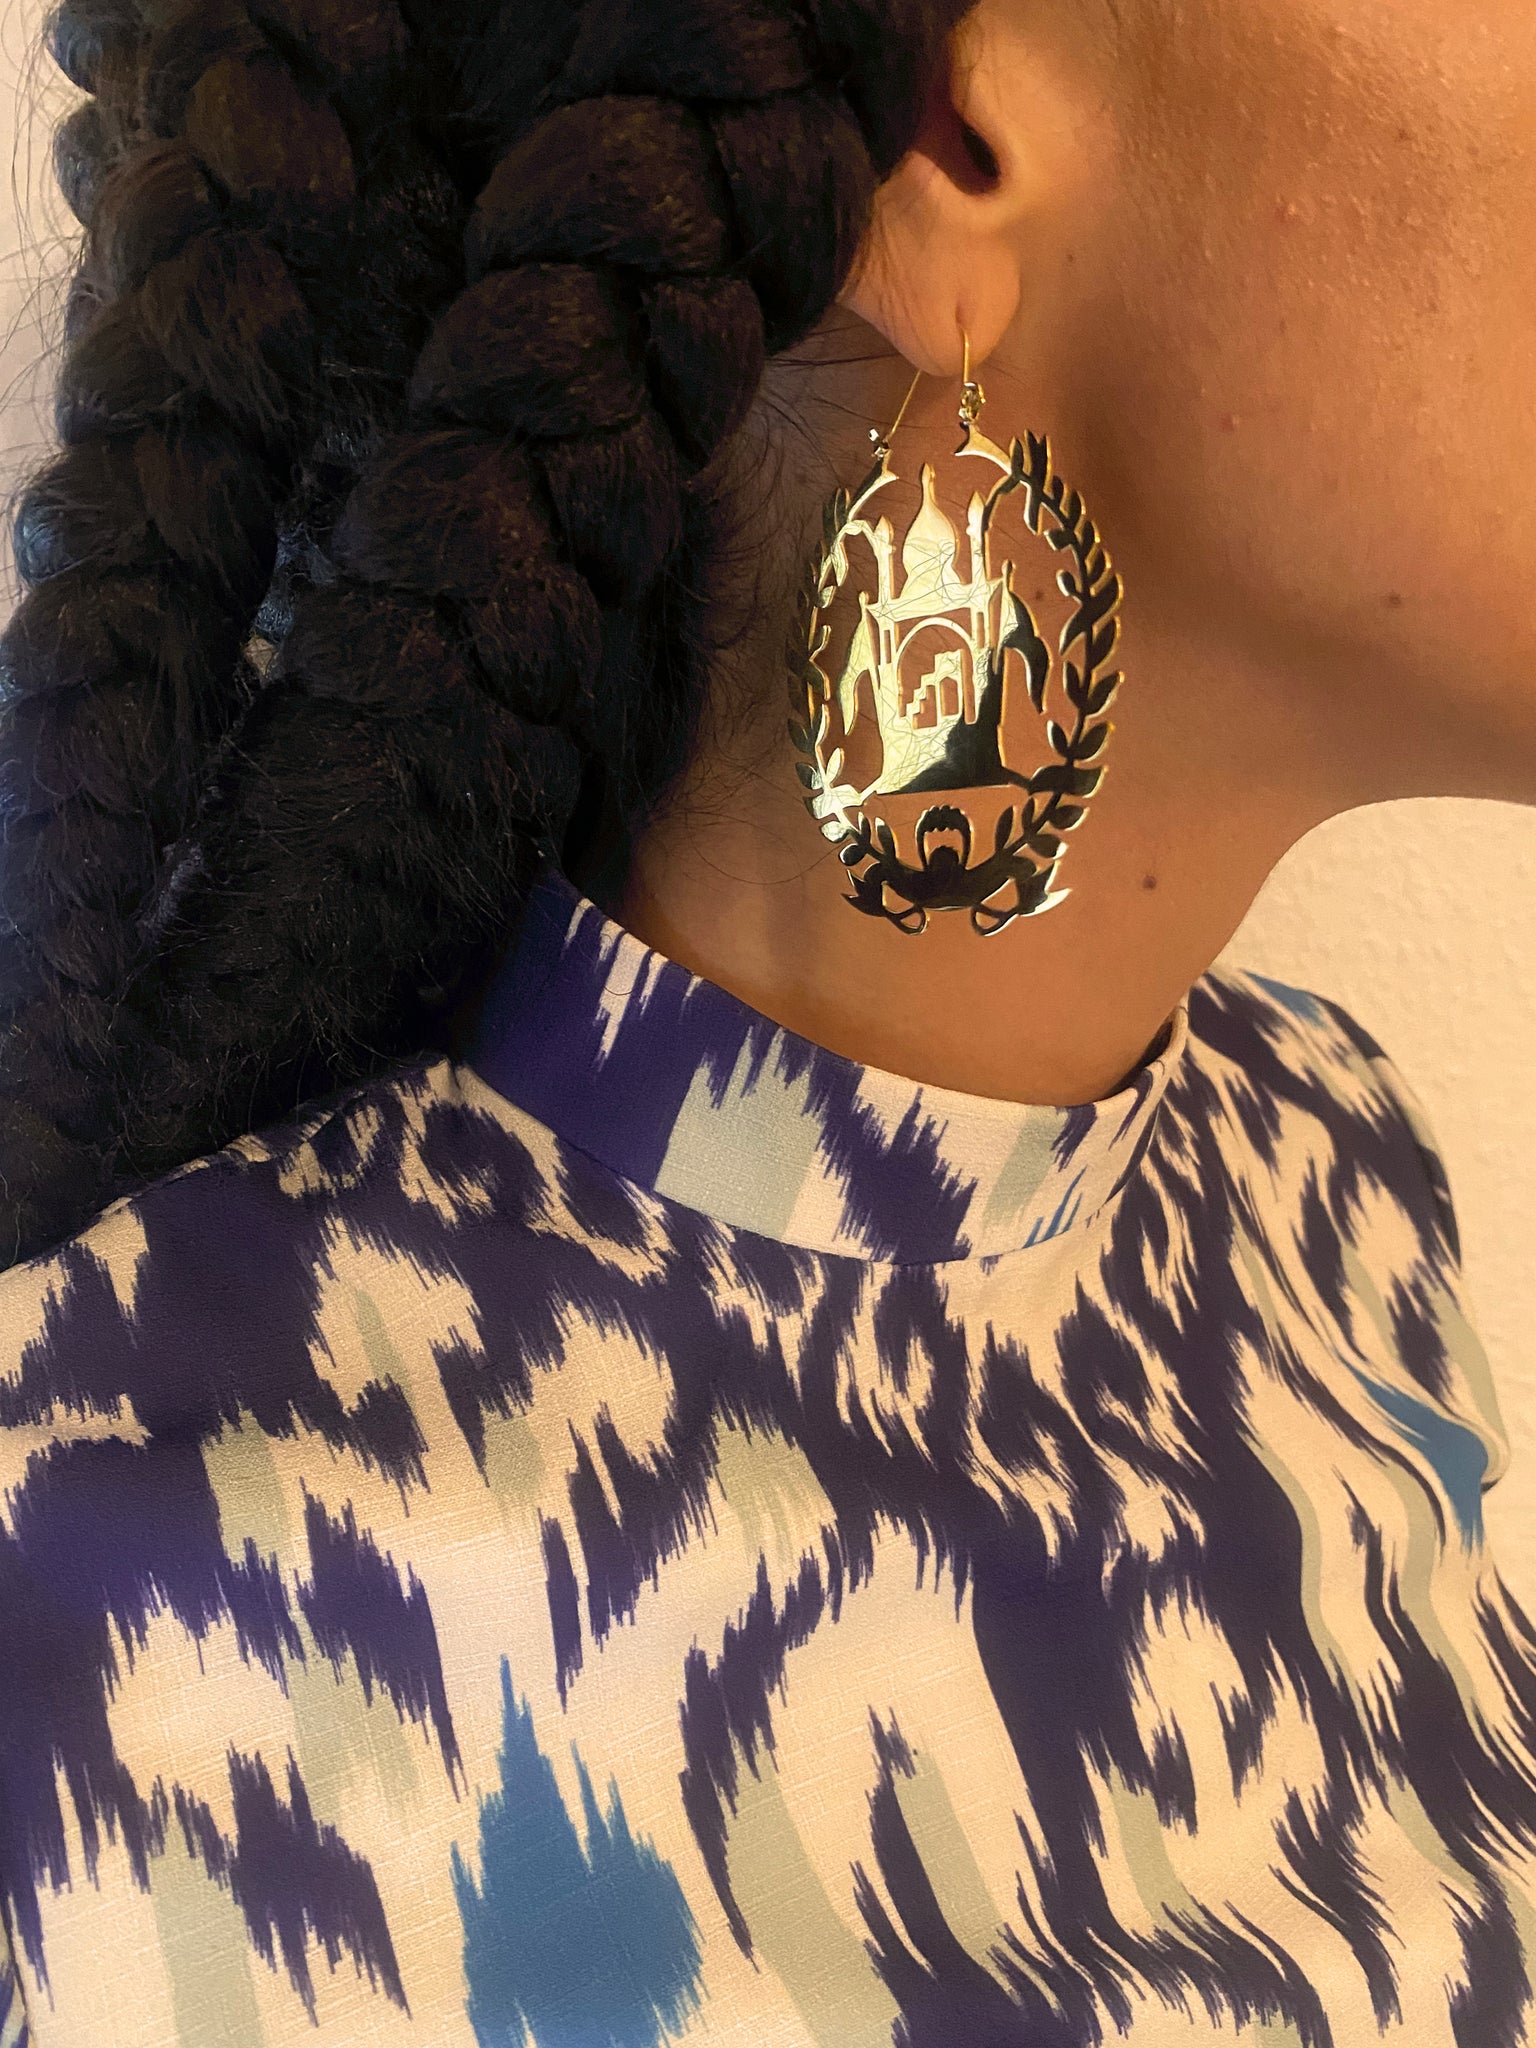 A woman with long braids wears gold mehrab earrings reflecting light.